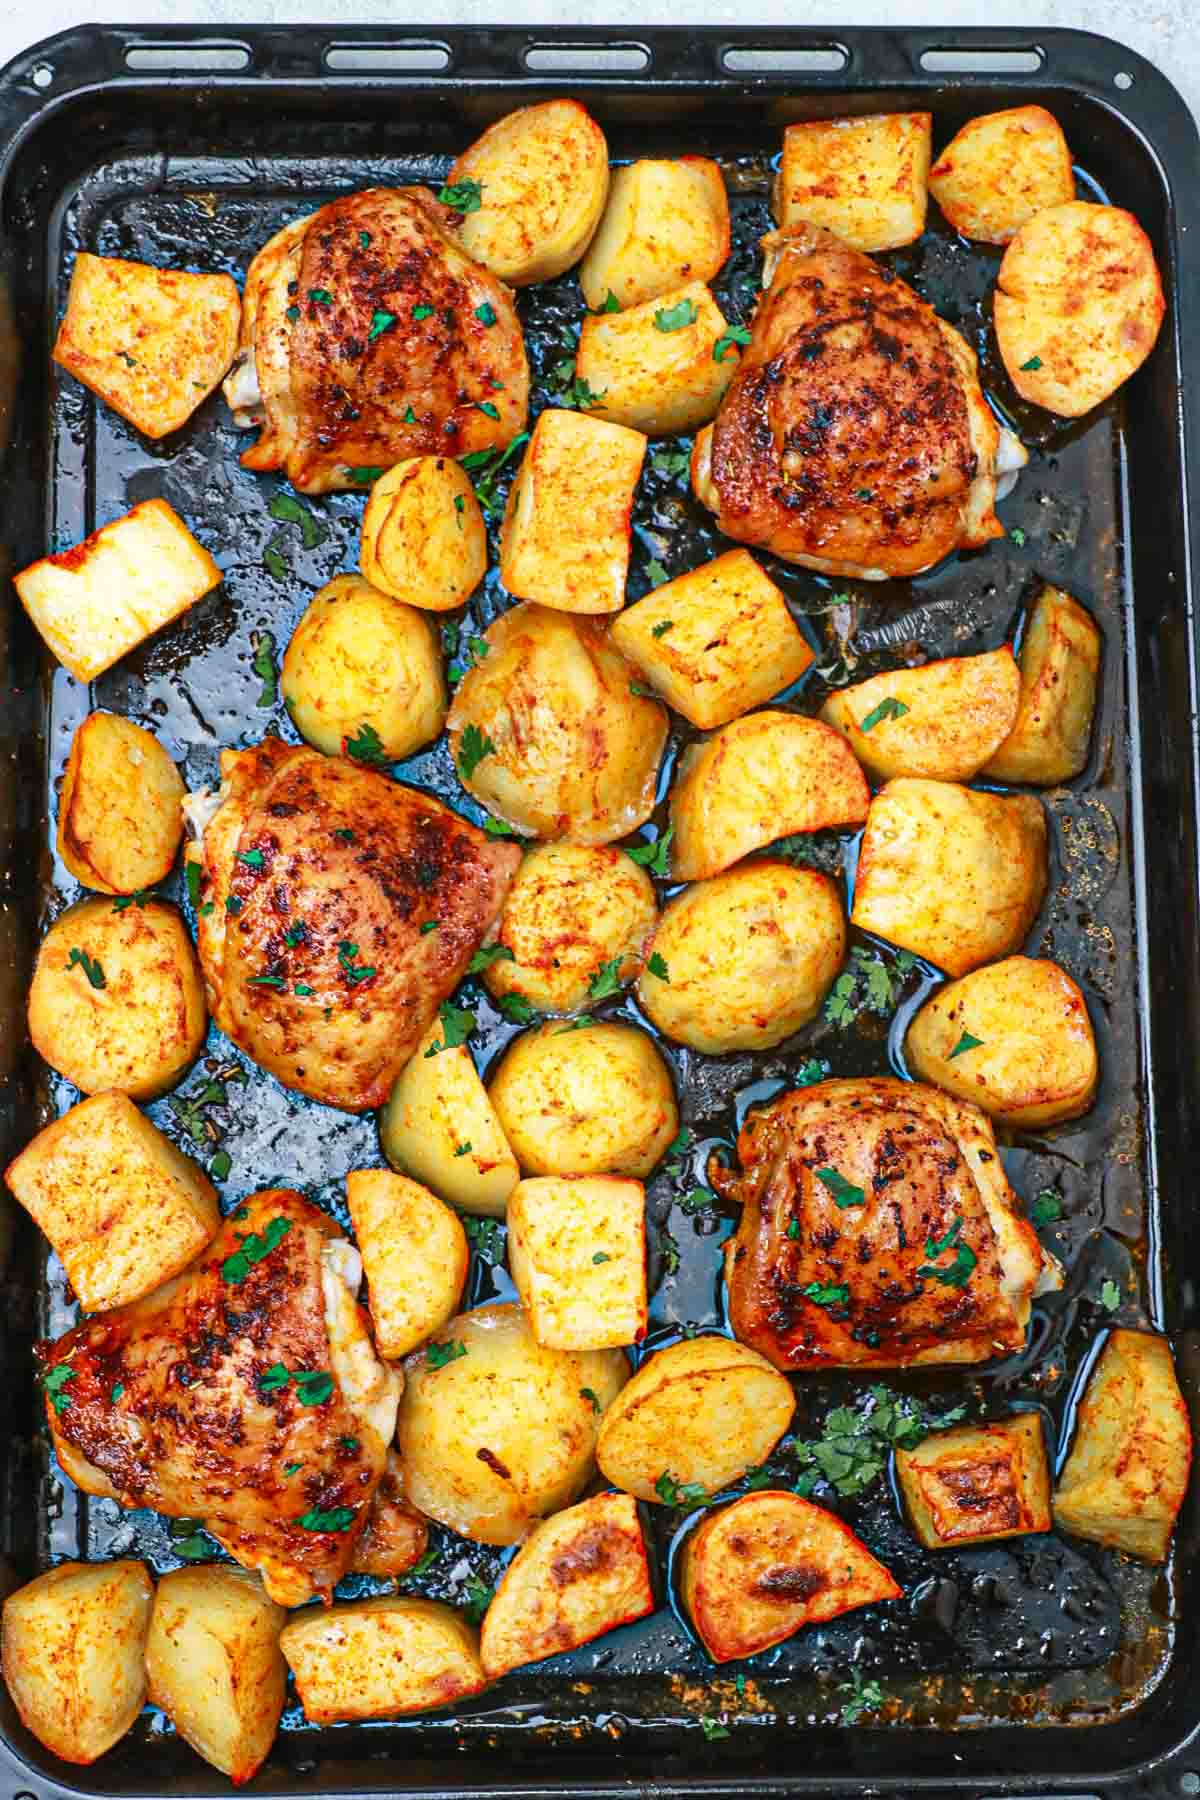 baked chicken thighs and potatoes in a sheet pan.